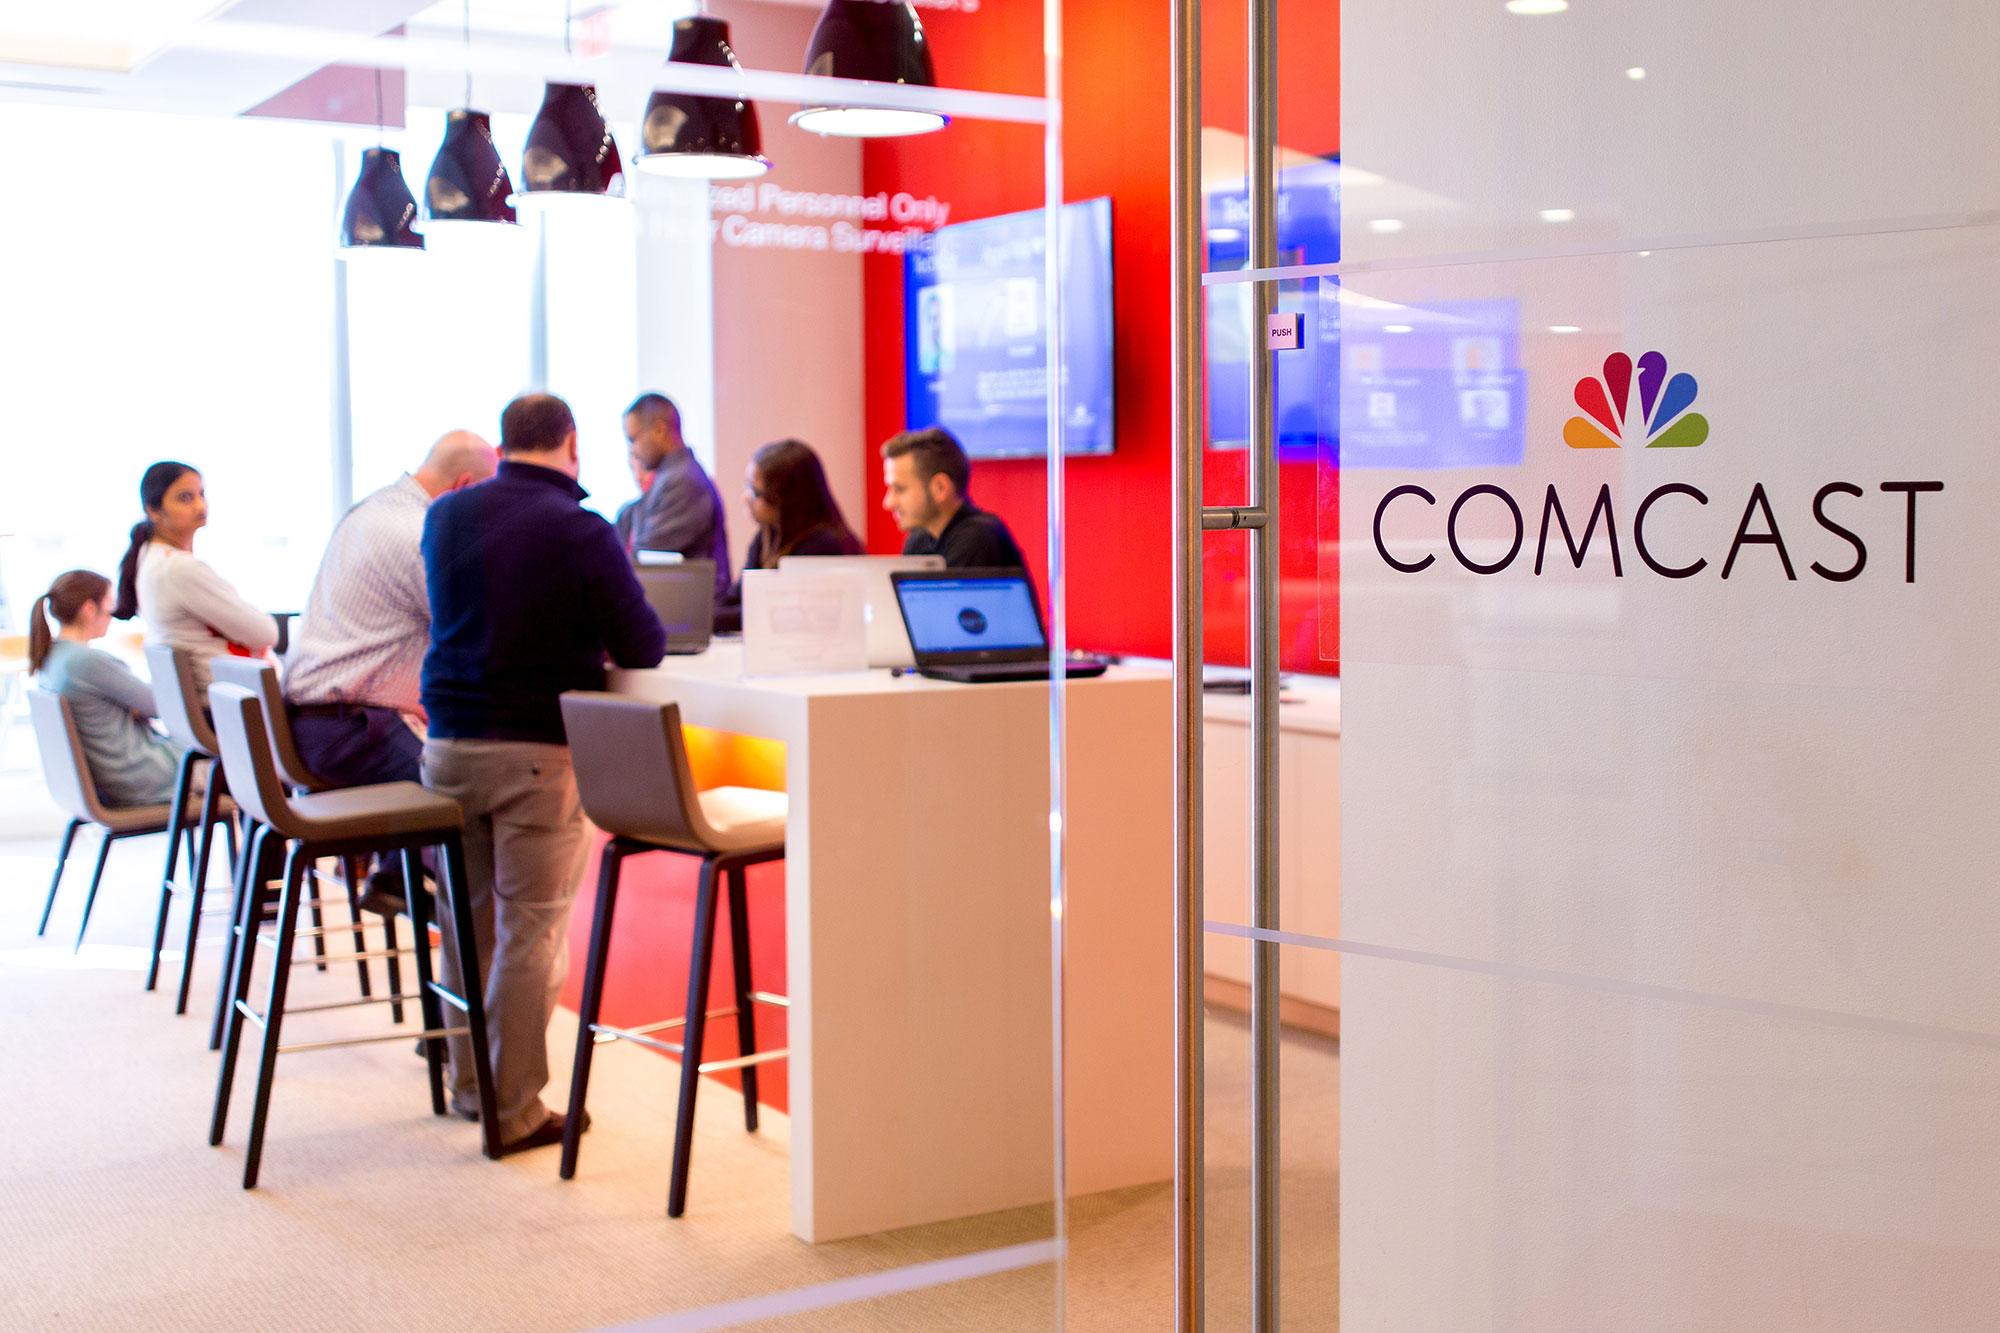 Comcast employees collaborating on connectivity